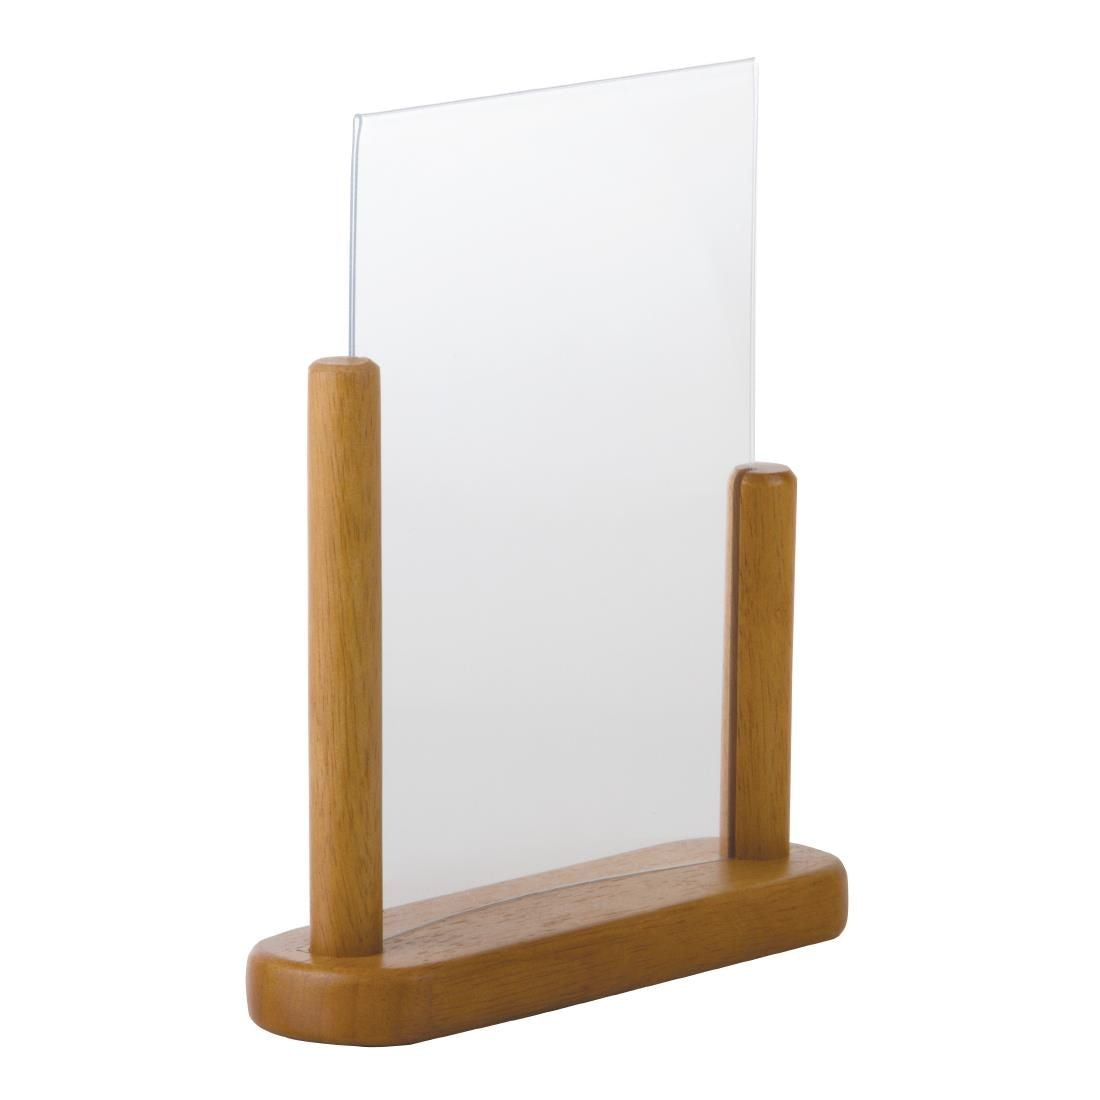 CE408 Securit Acrylic Menu Holder With Wooden Frame A5